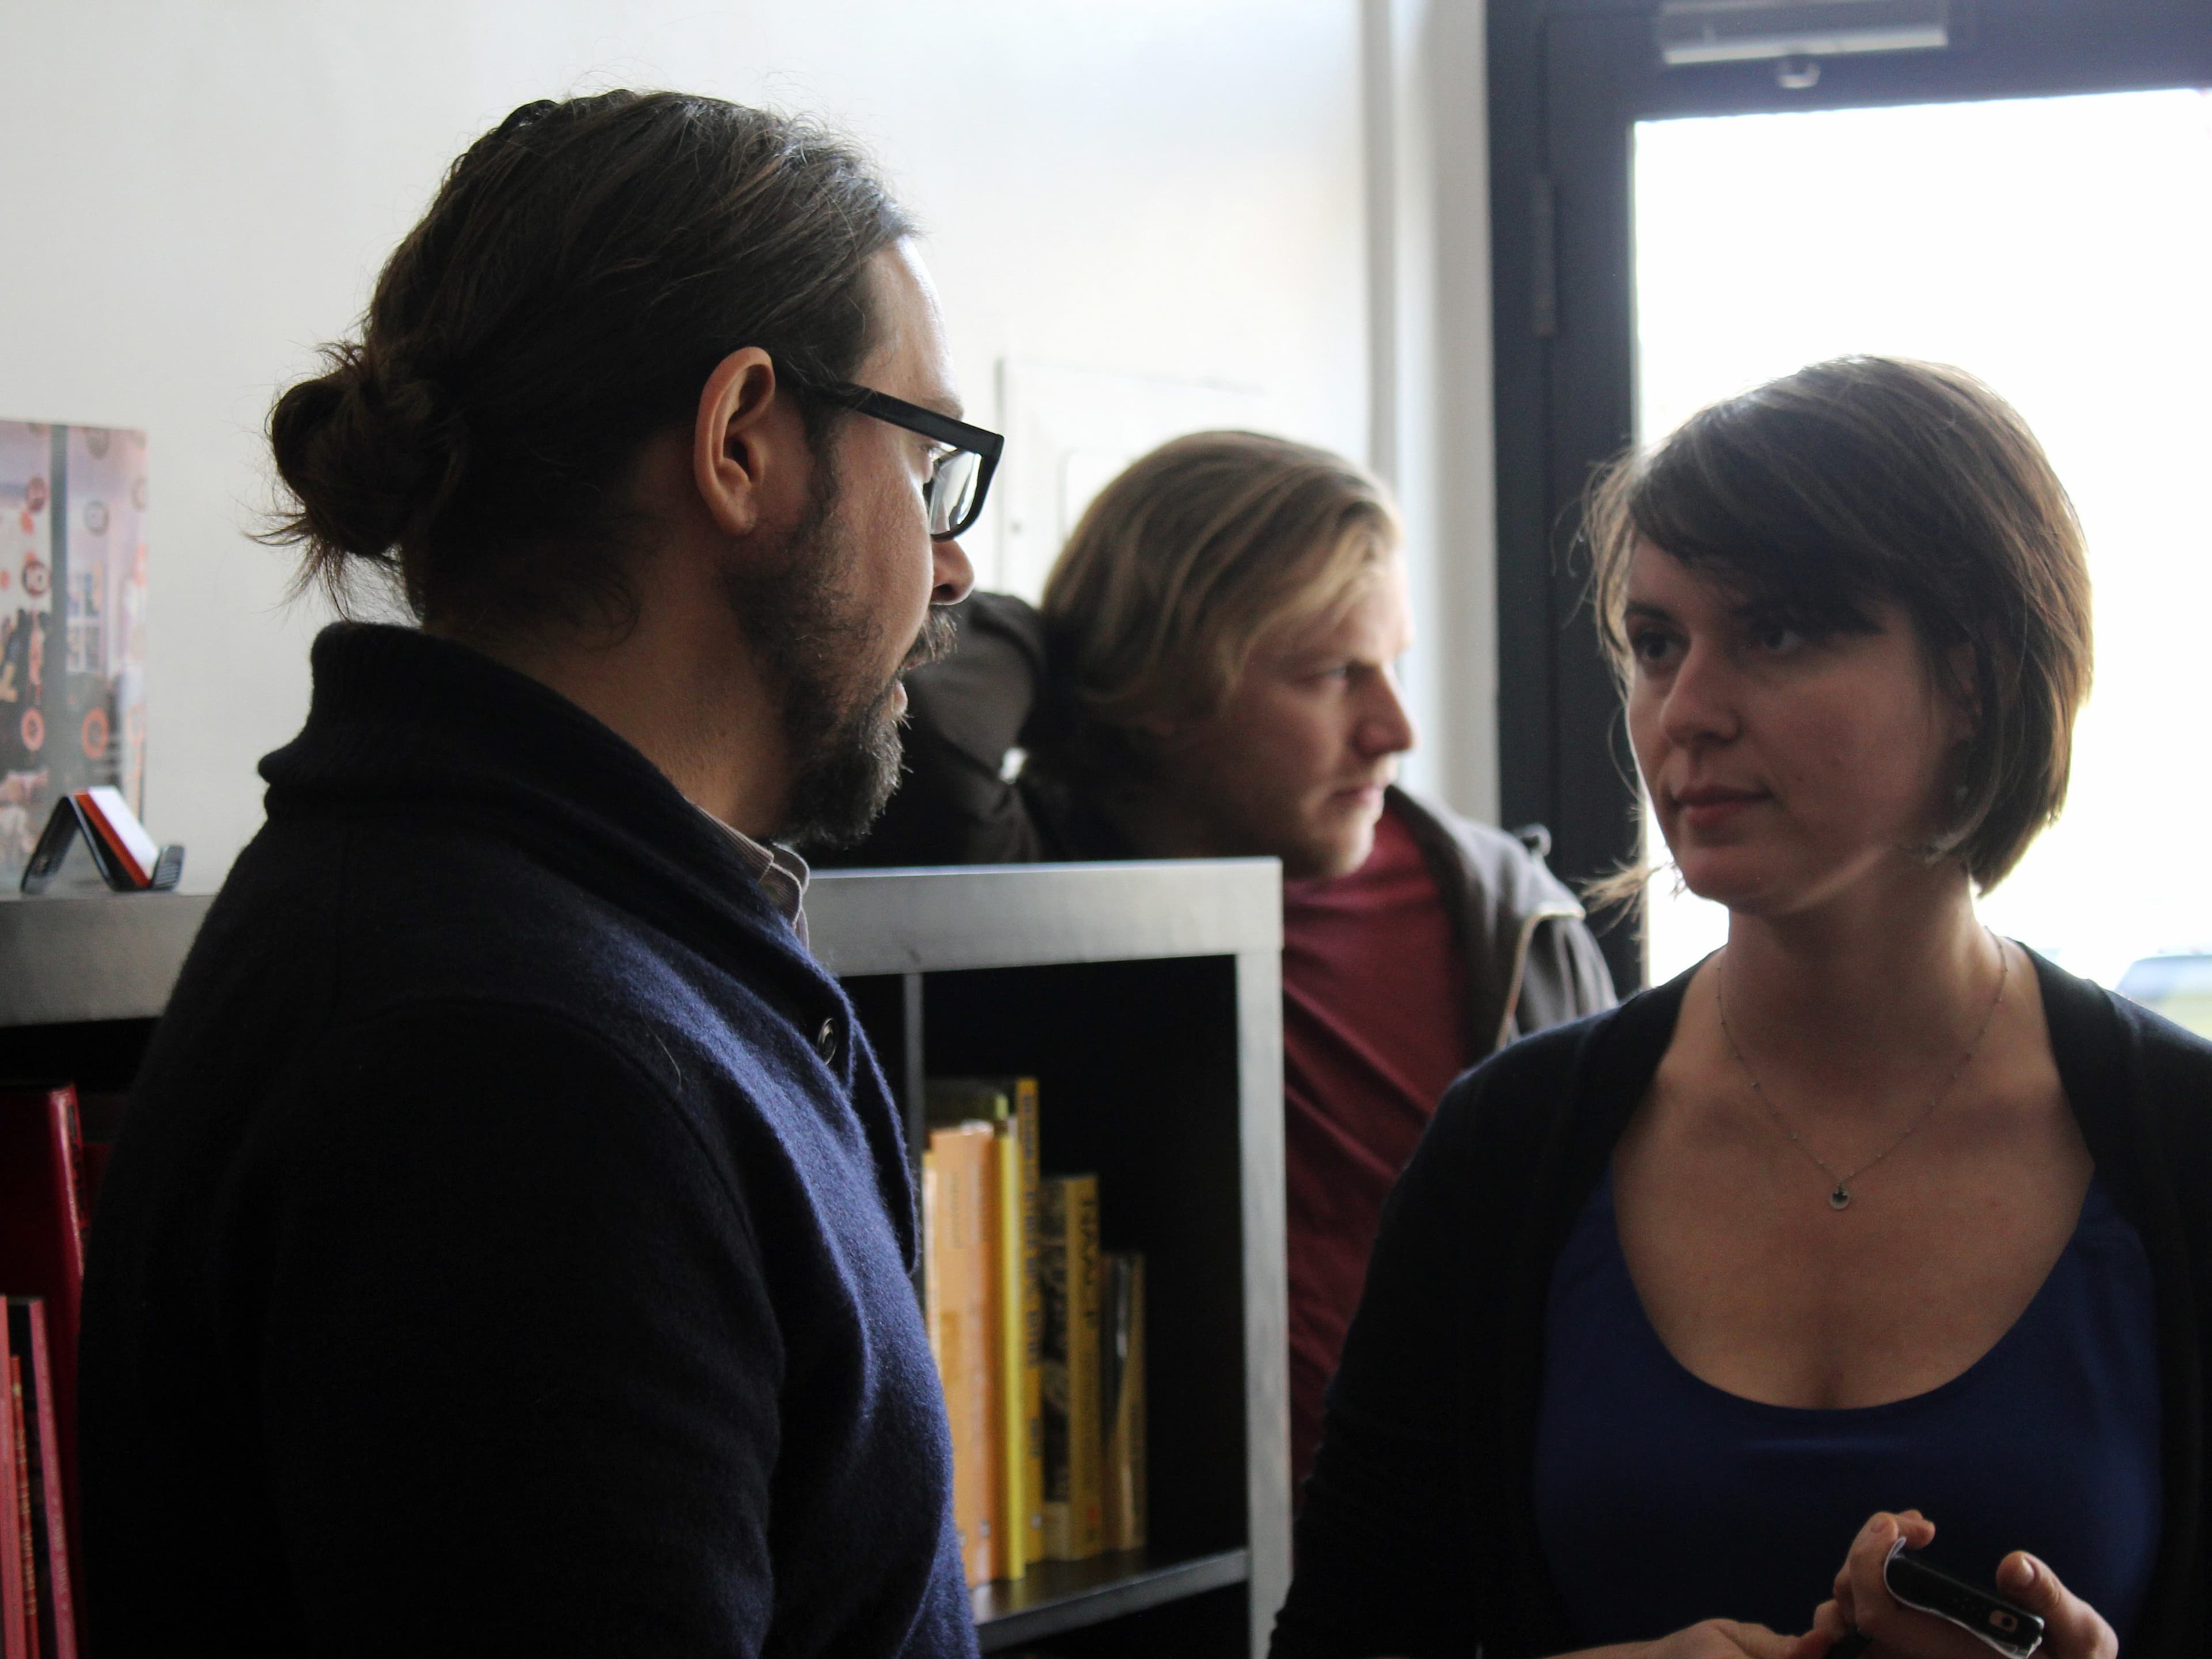 A man with glasses and a ponytail is speaking to a woman with short hair who is holding a phone. Another man with blond hair stands in the background, facing away. They are indoors near a window, with a bookshelf filled with books next to them.